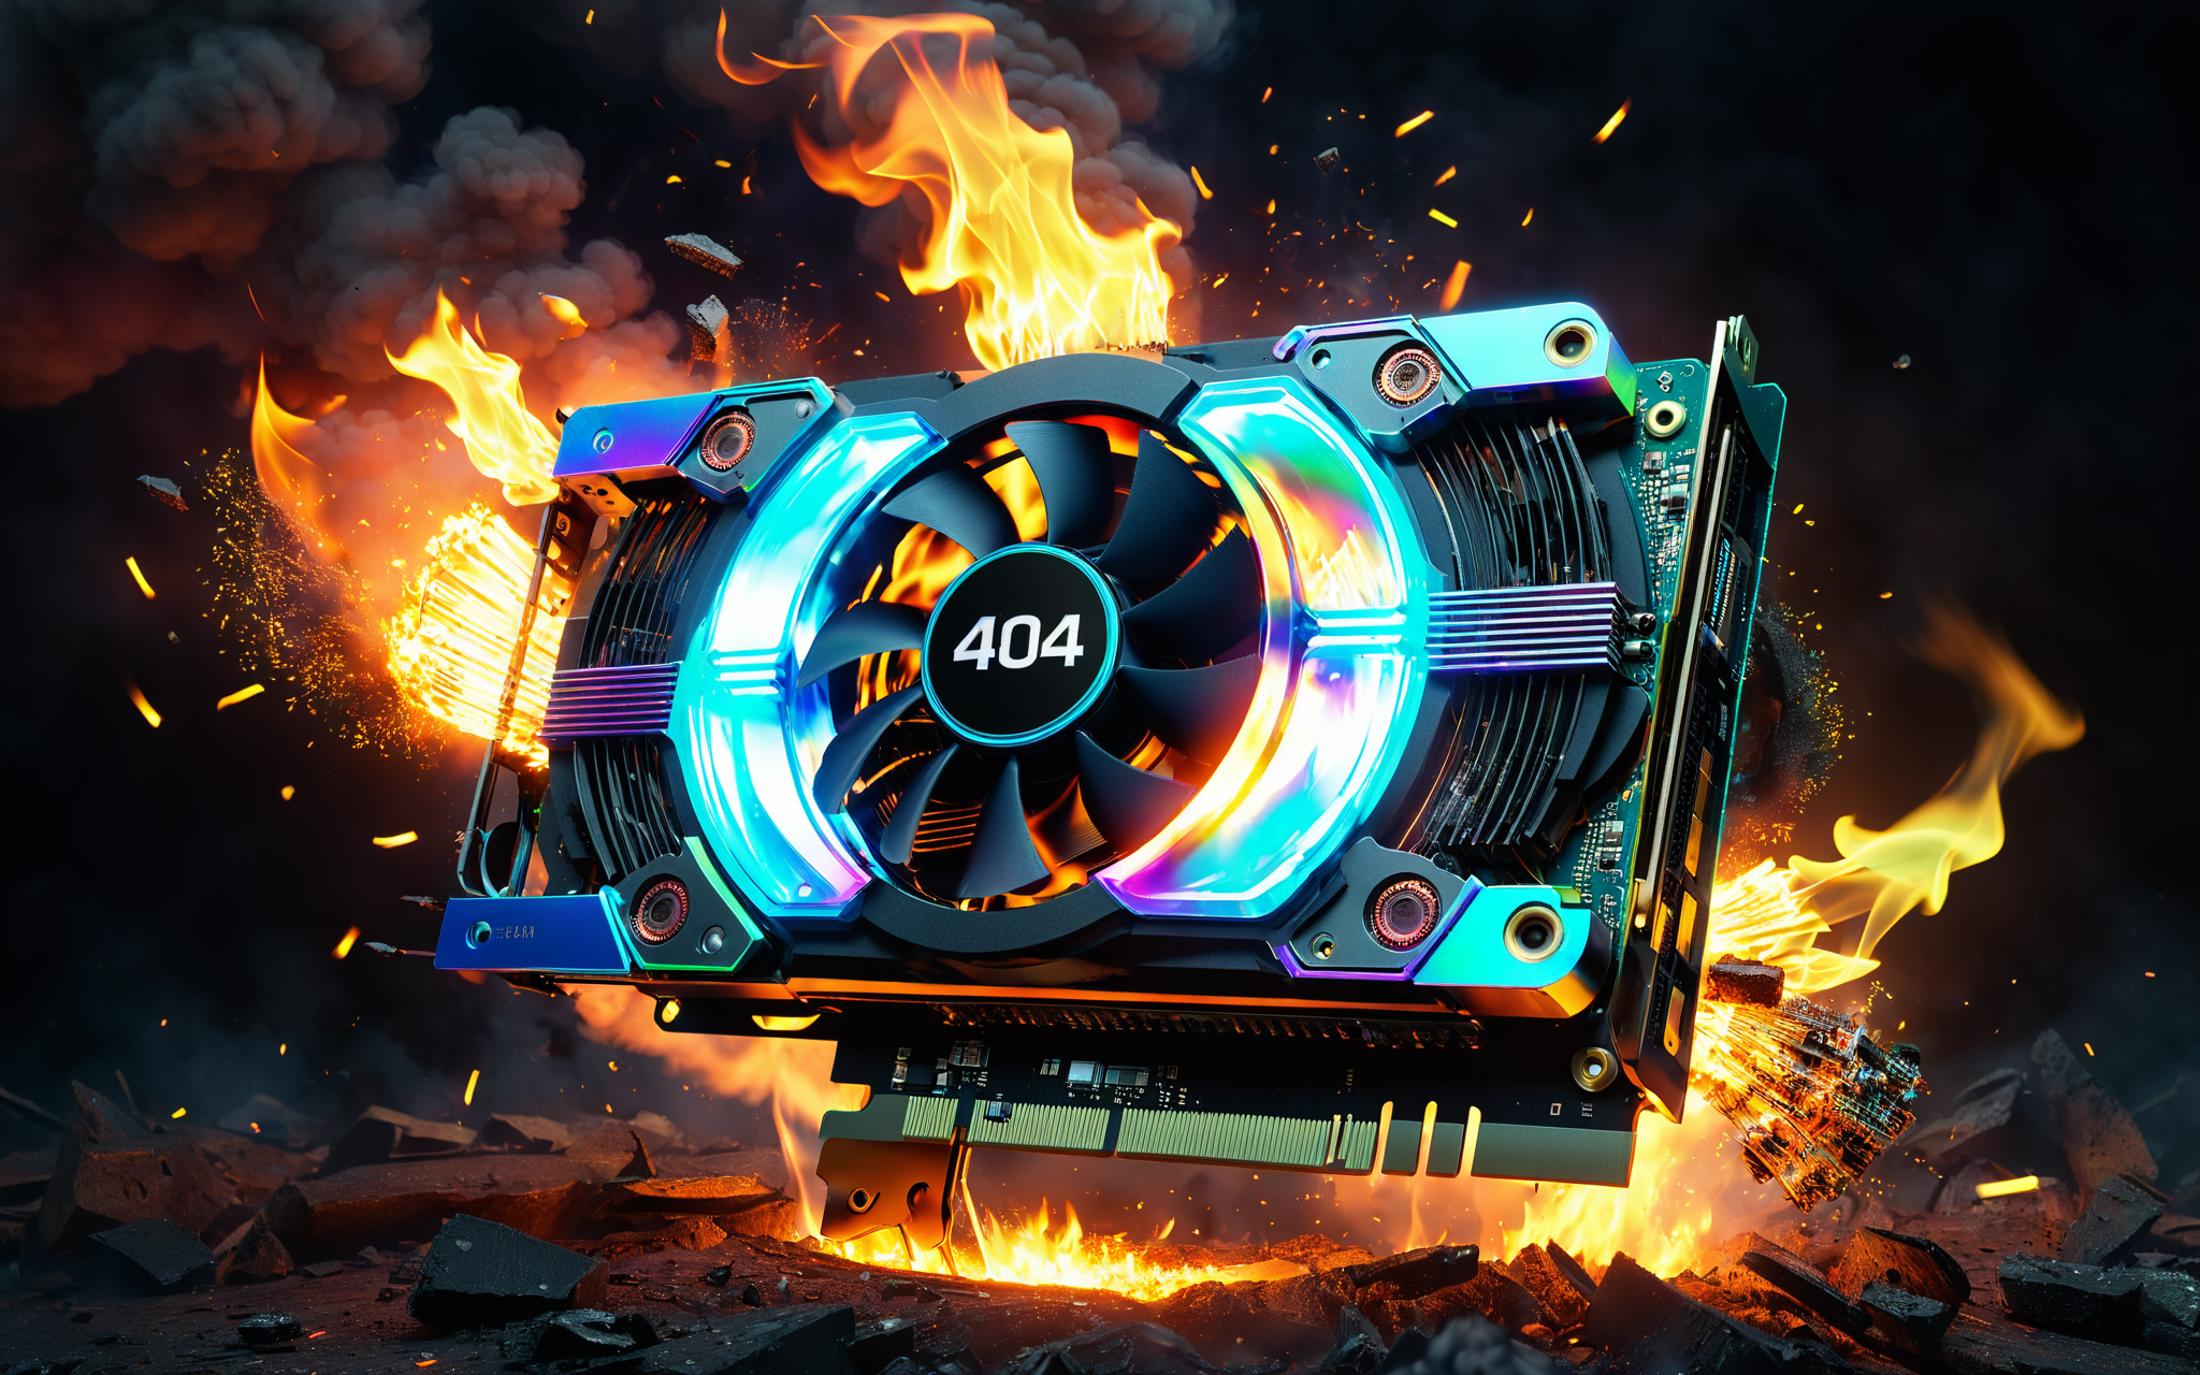 A computer component with the number 404 on it, surrounded by a fiery background.